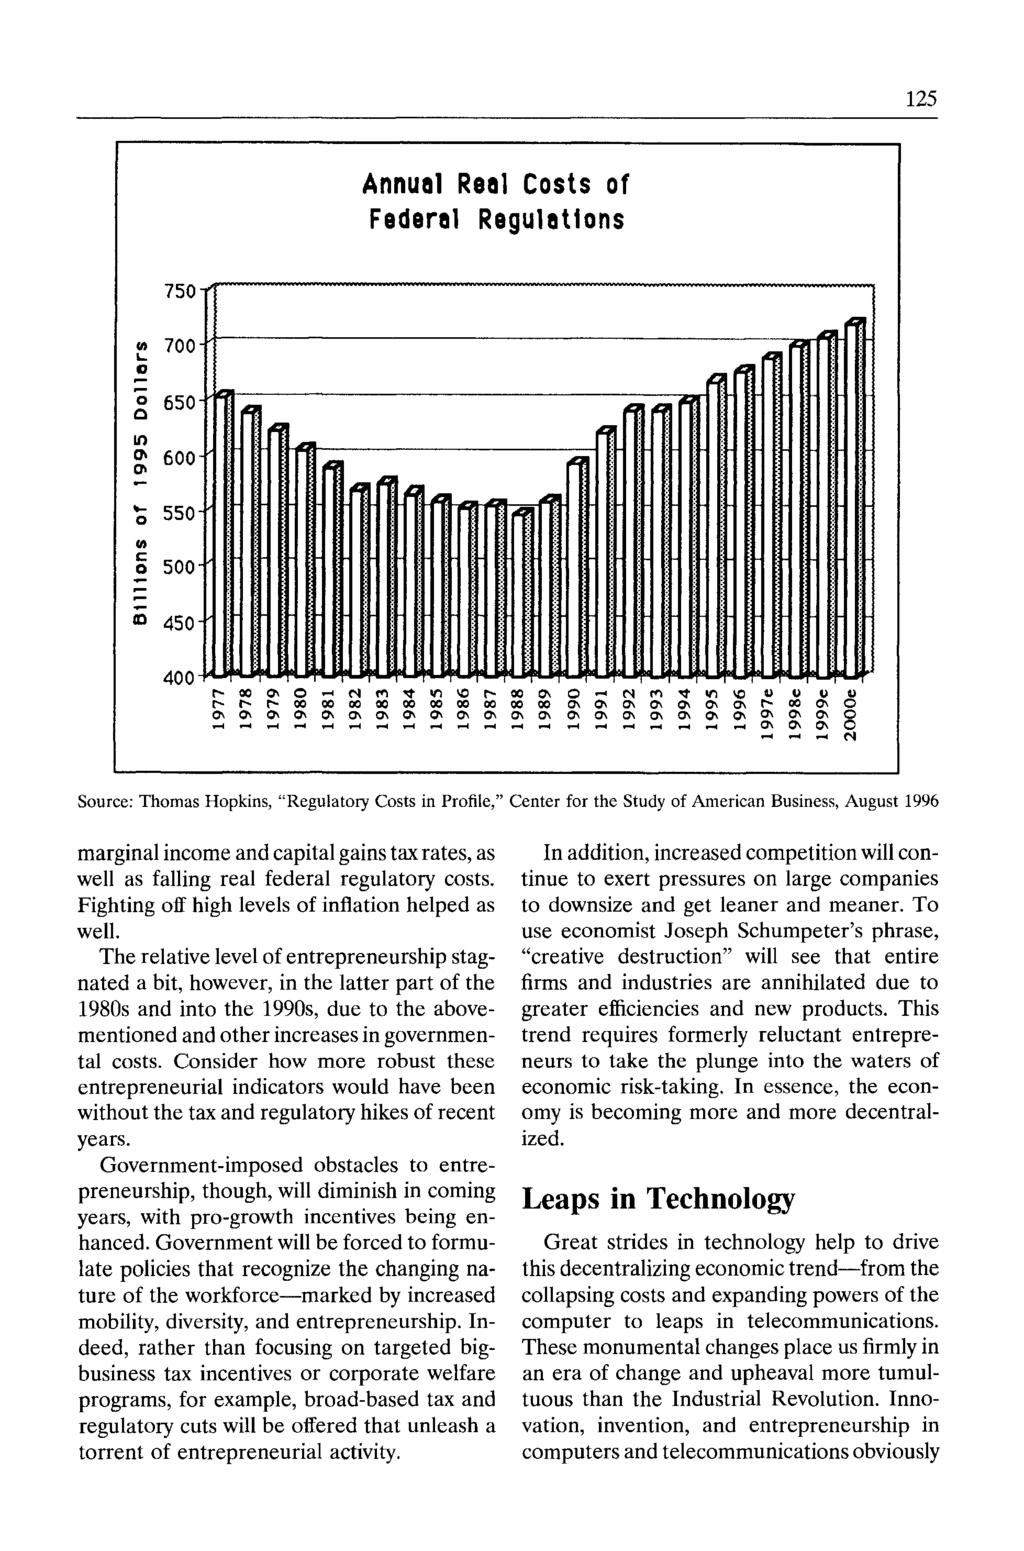 Source: Thomas Hopkins, "Regulatory Costs in Profile," Center for the Study of American Business, August 1996 marginal income and capital gains tax rates, as well as falling real federal regulatory